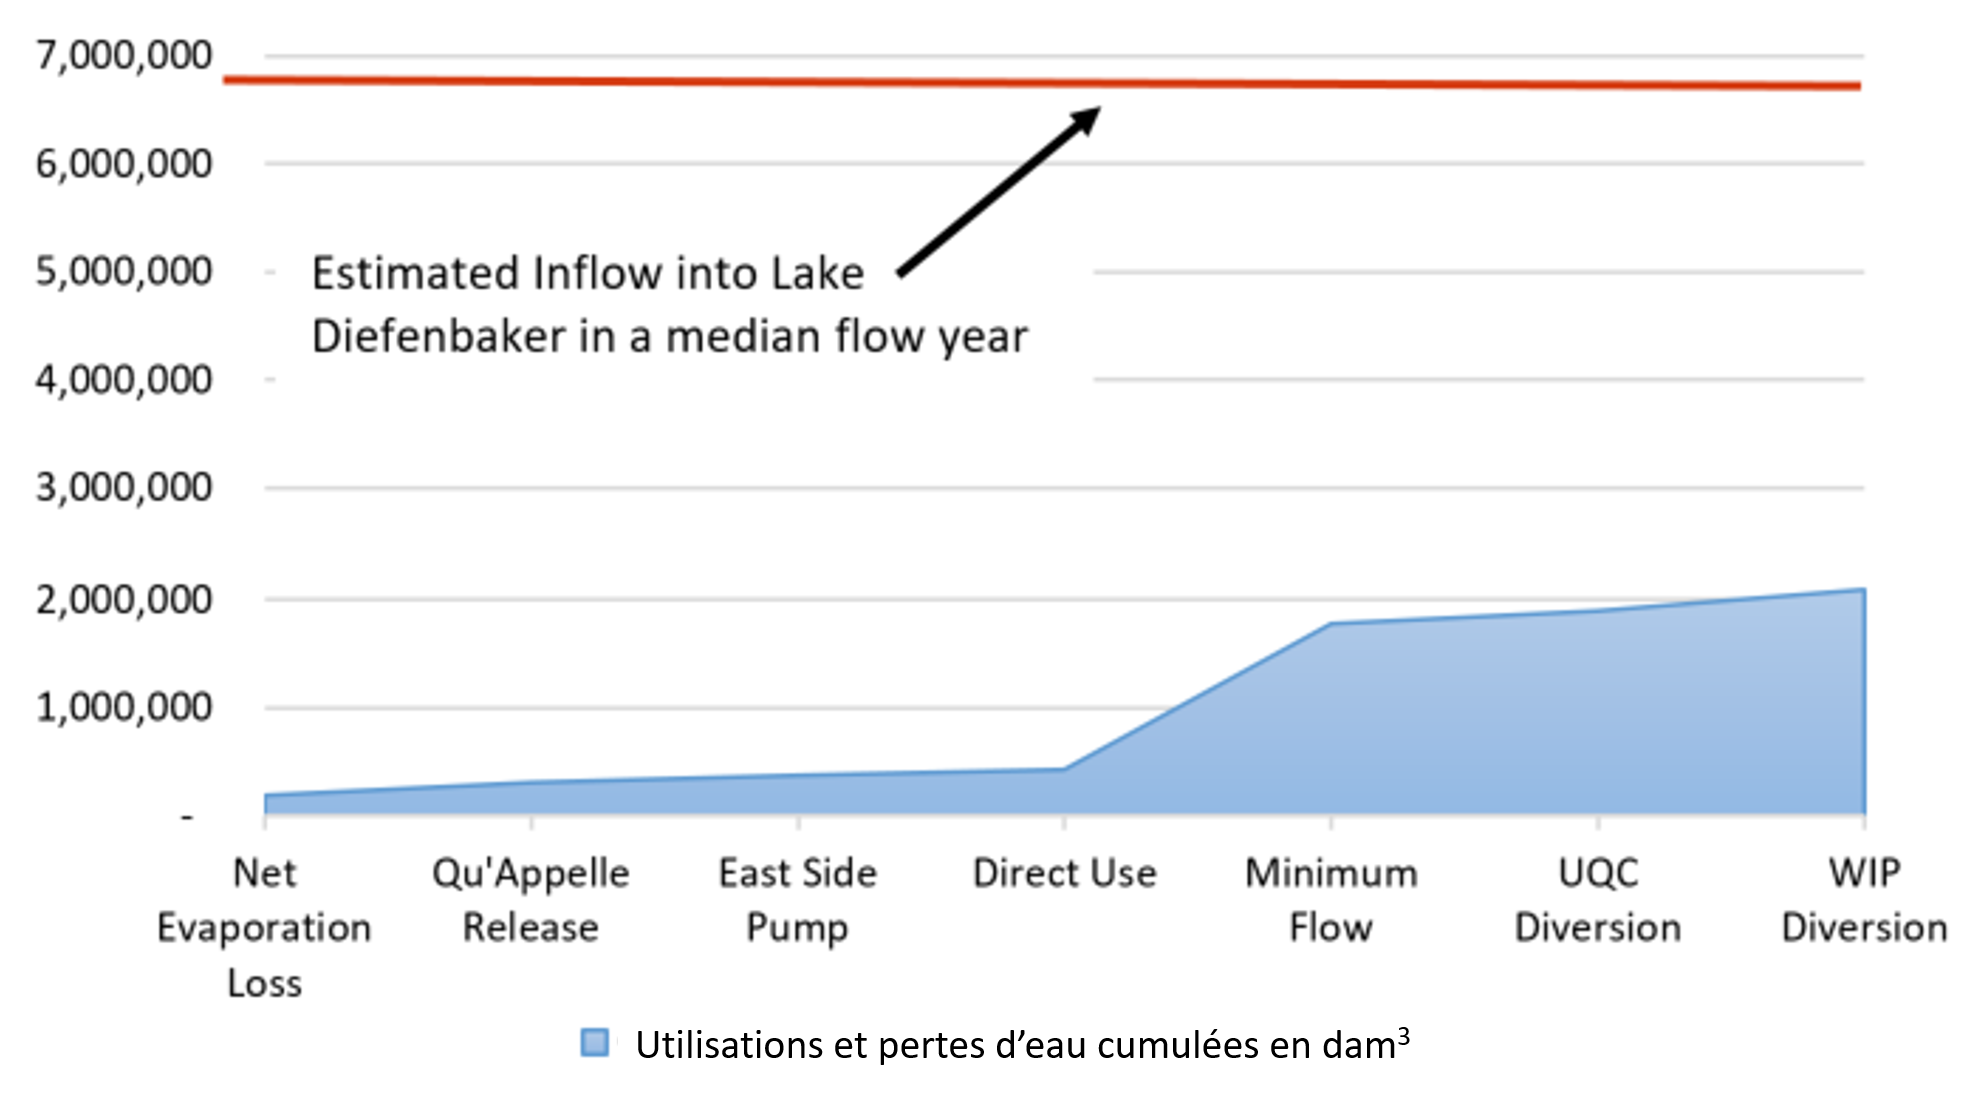 Graph of cumulative water uses and losses in a median flow year, compared to available inflow at Lake Diefenbaker